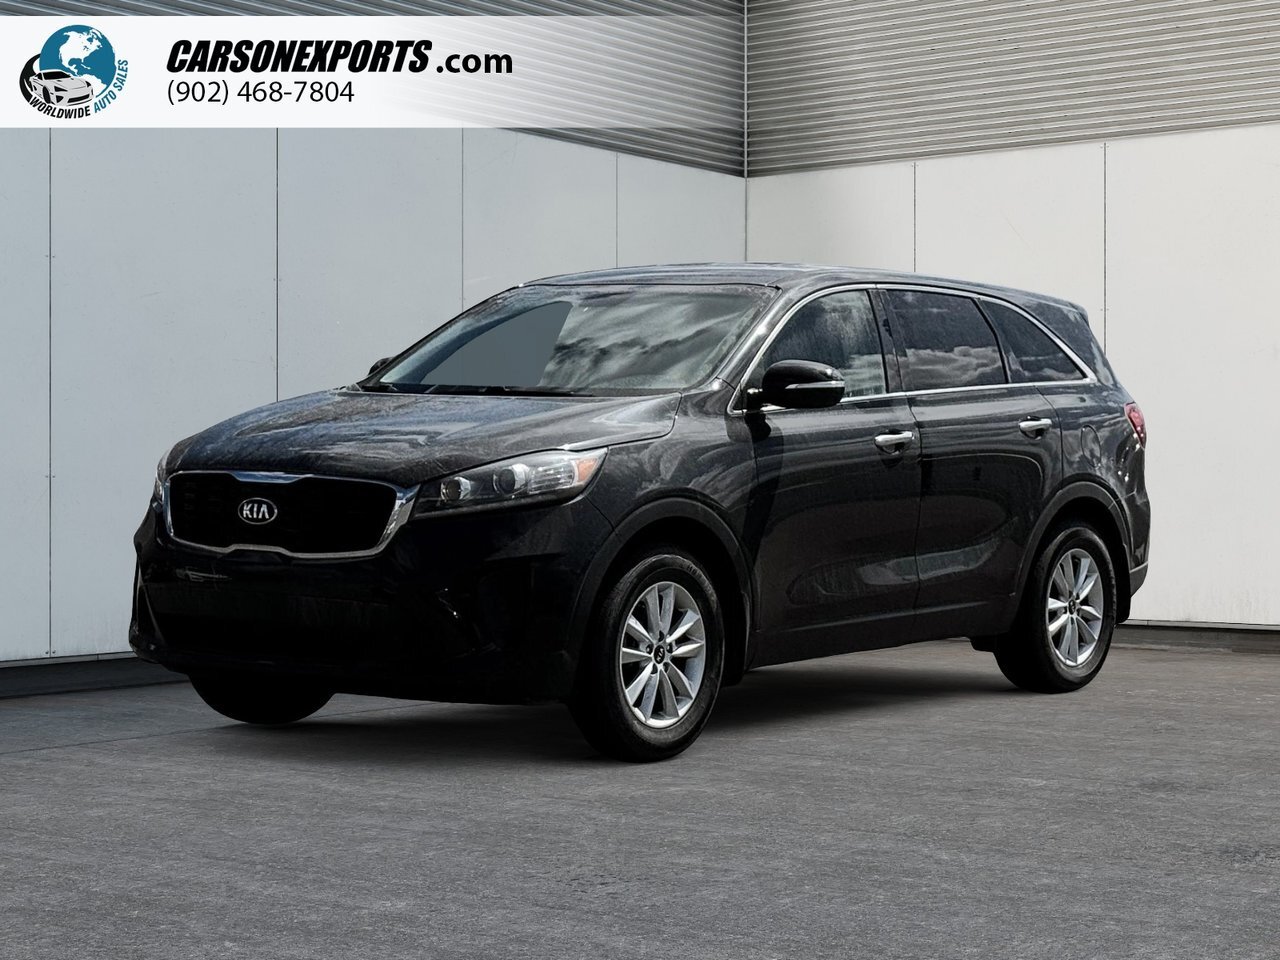 2019 Kia Sorento LX The best place to buy a used car. Period.